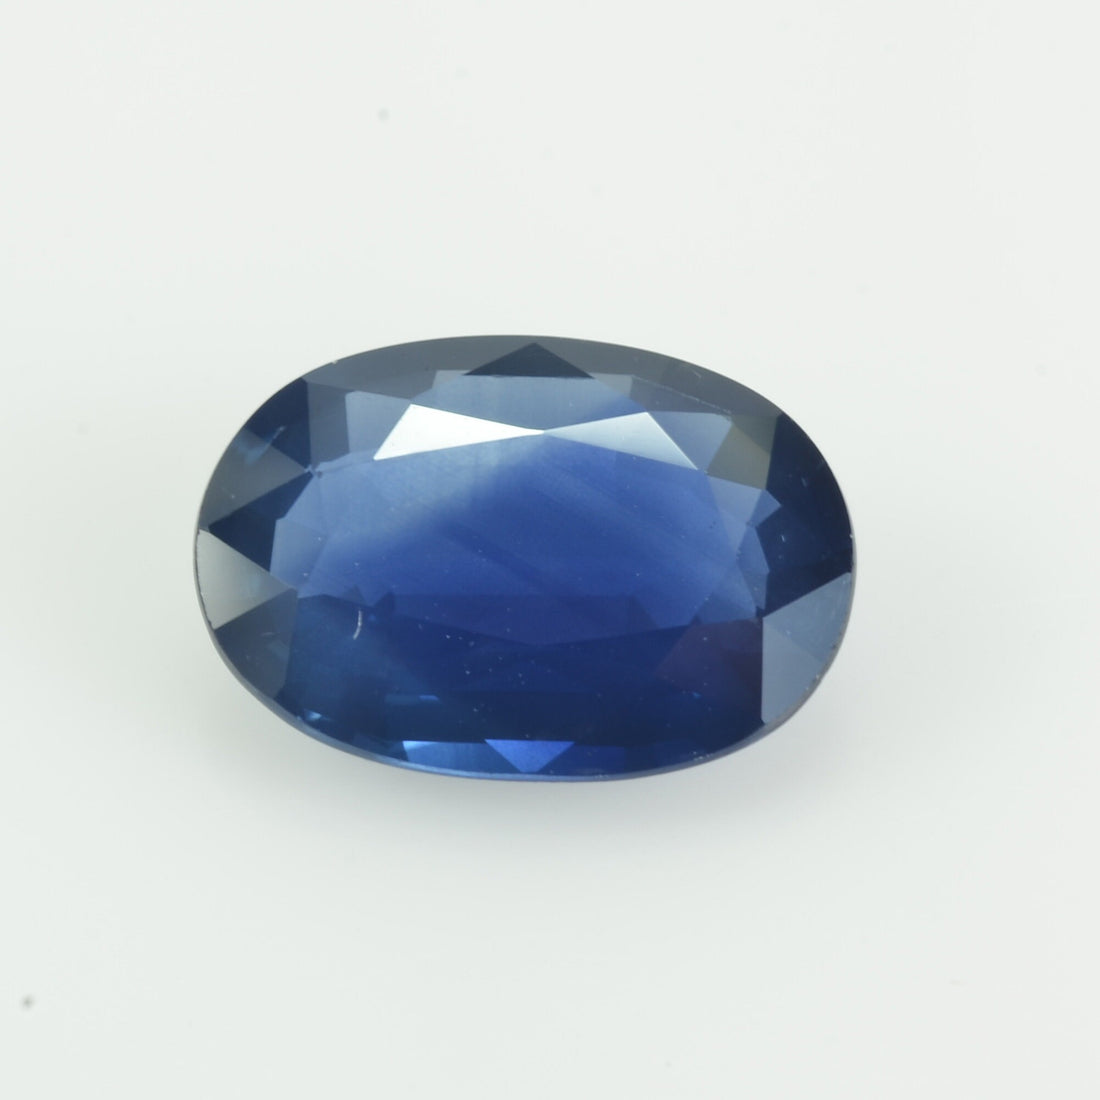 3.44 cts Natural Blue Sapphire Loose Gemstone Oval Cut